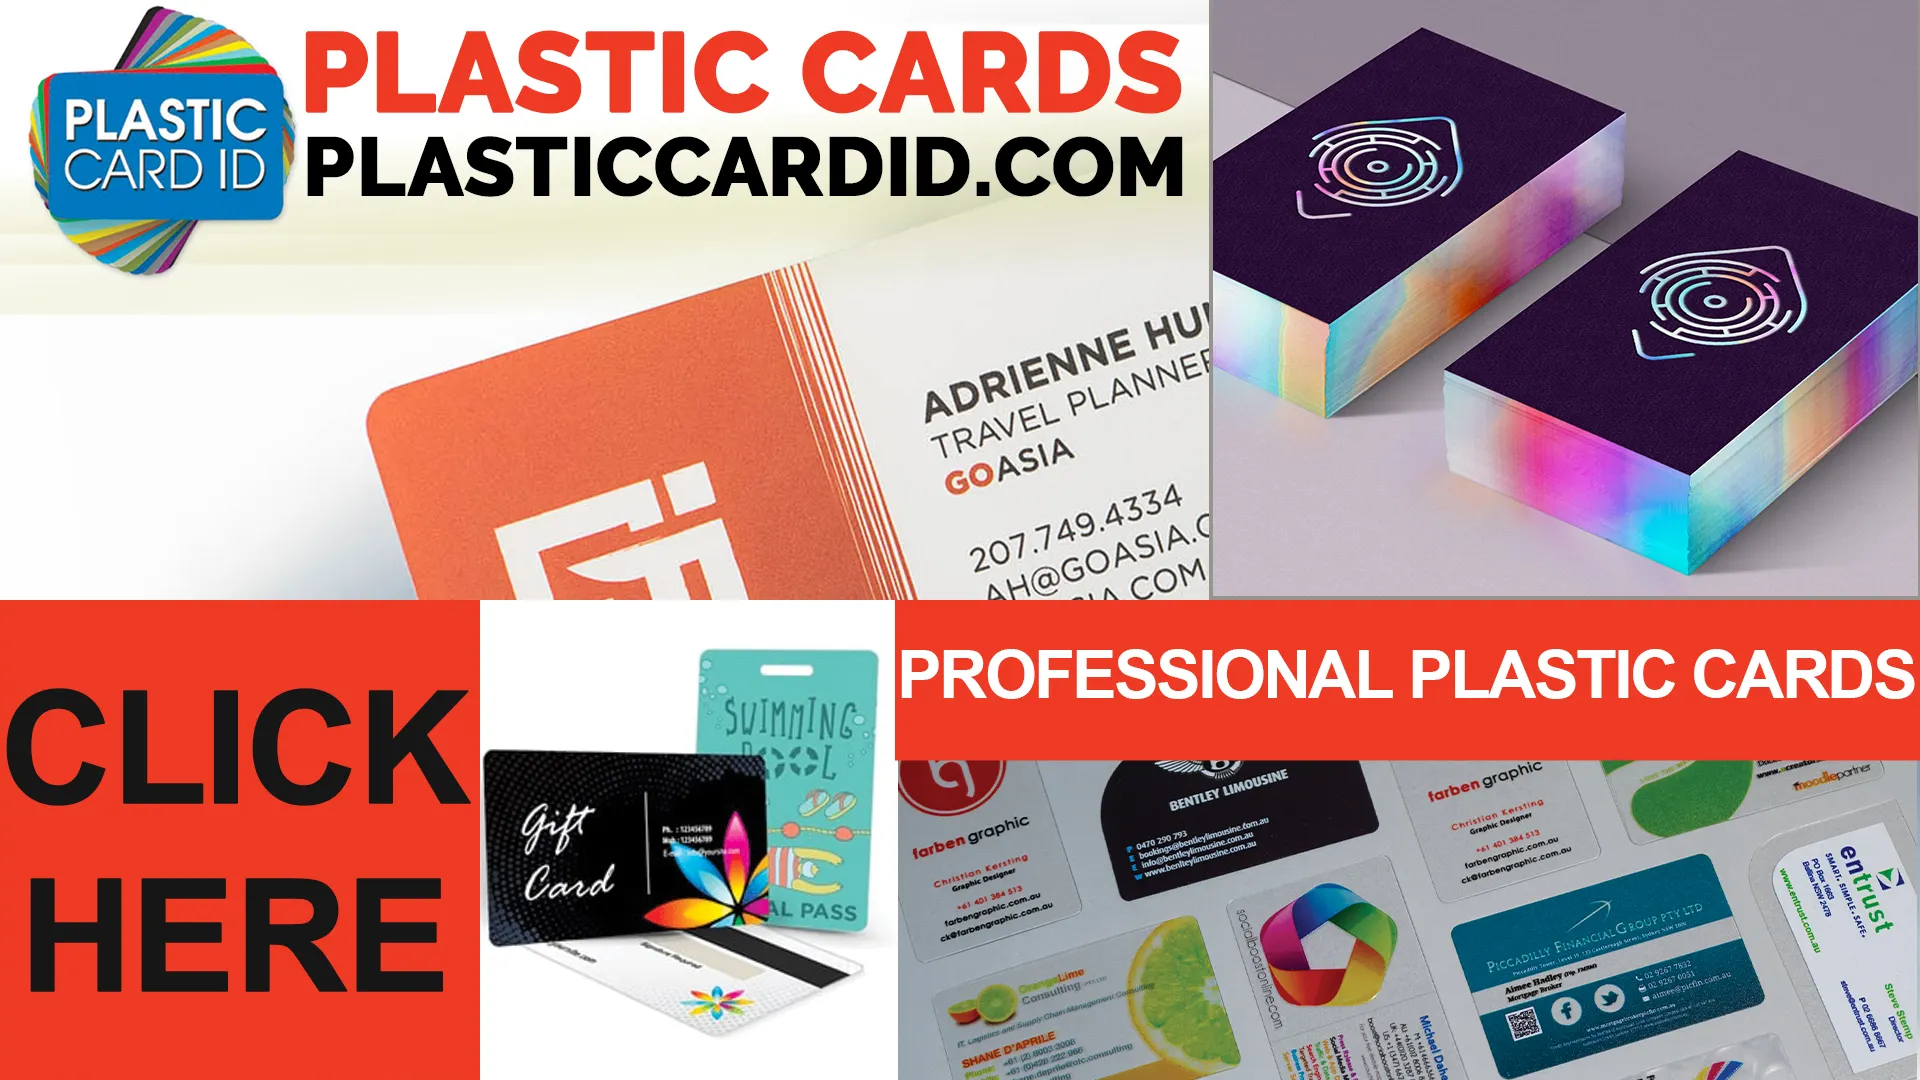 Welcome to the World of Customized Card Solutions